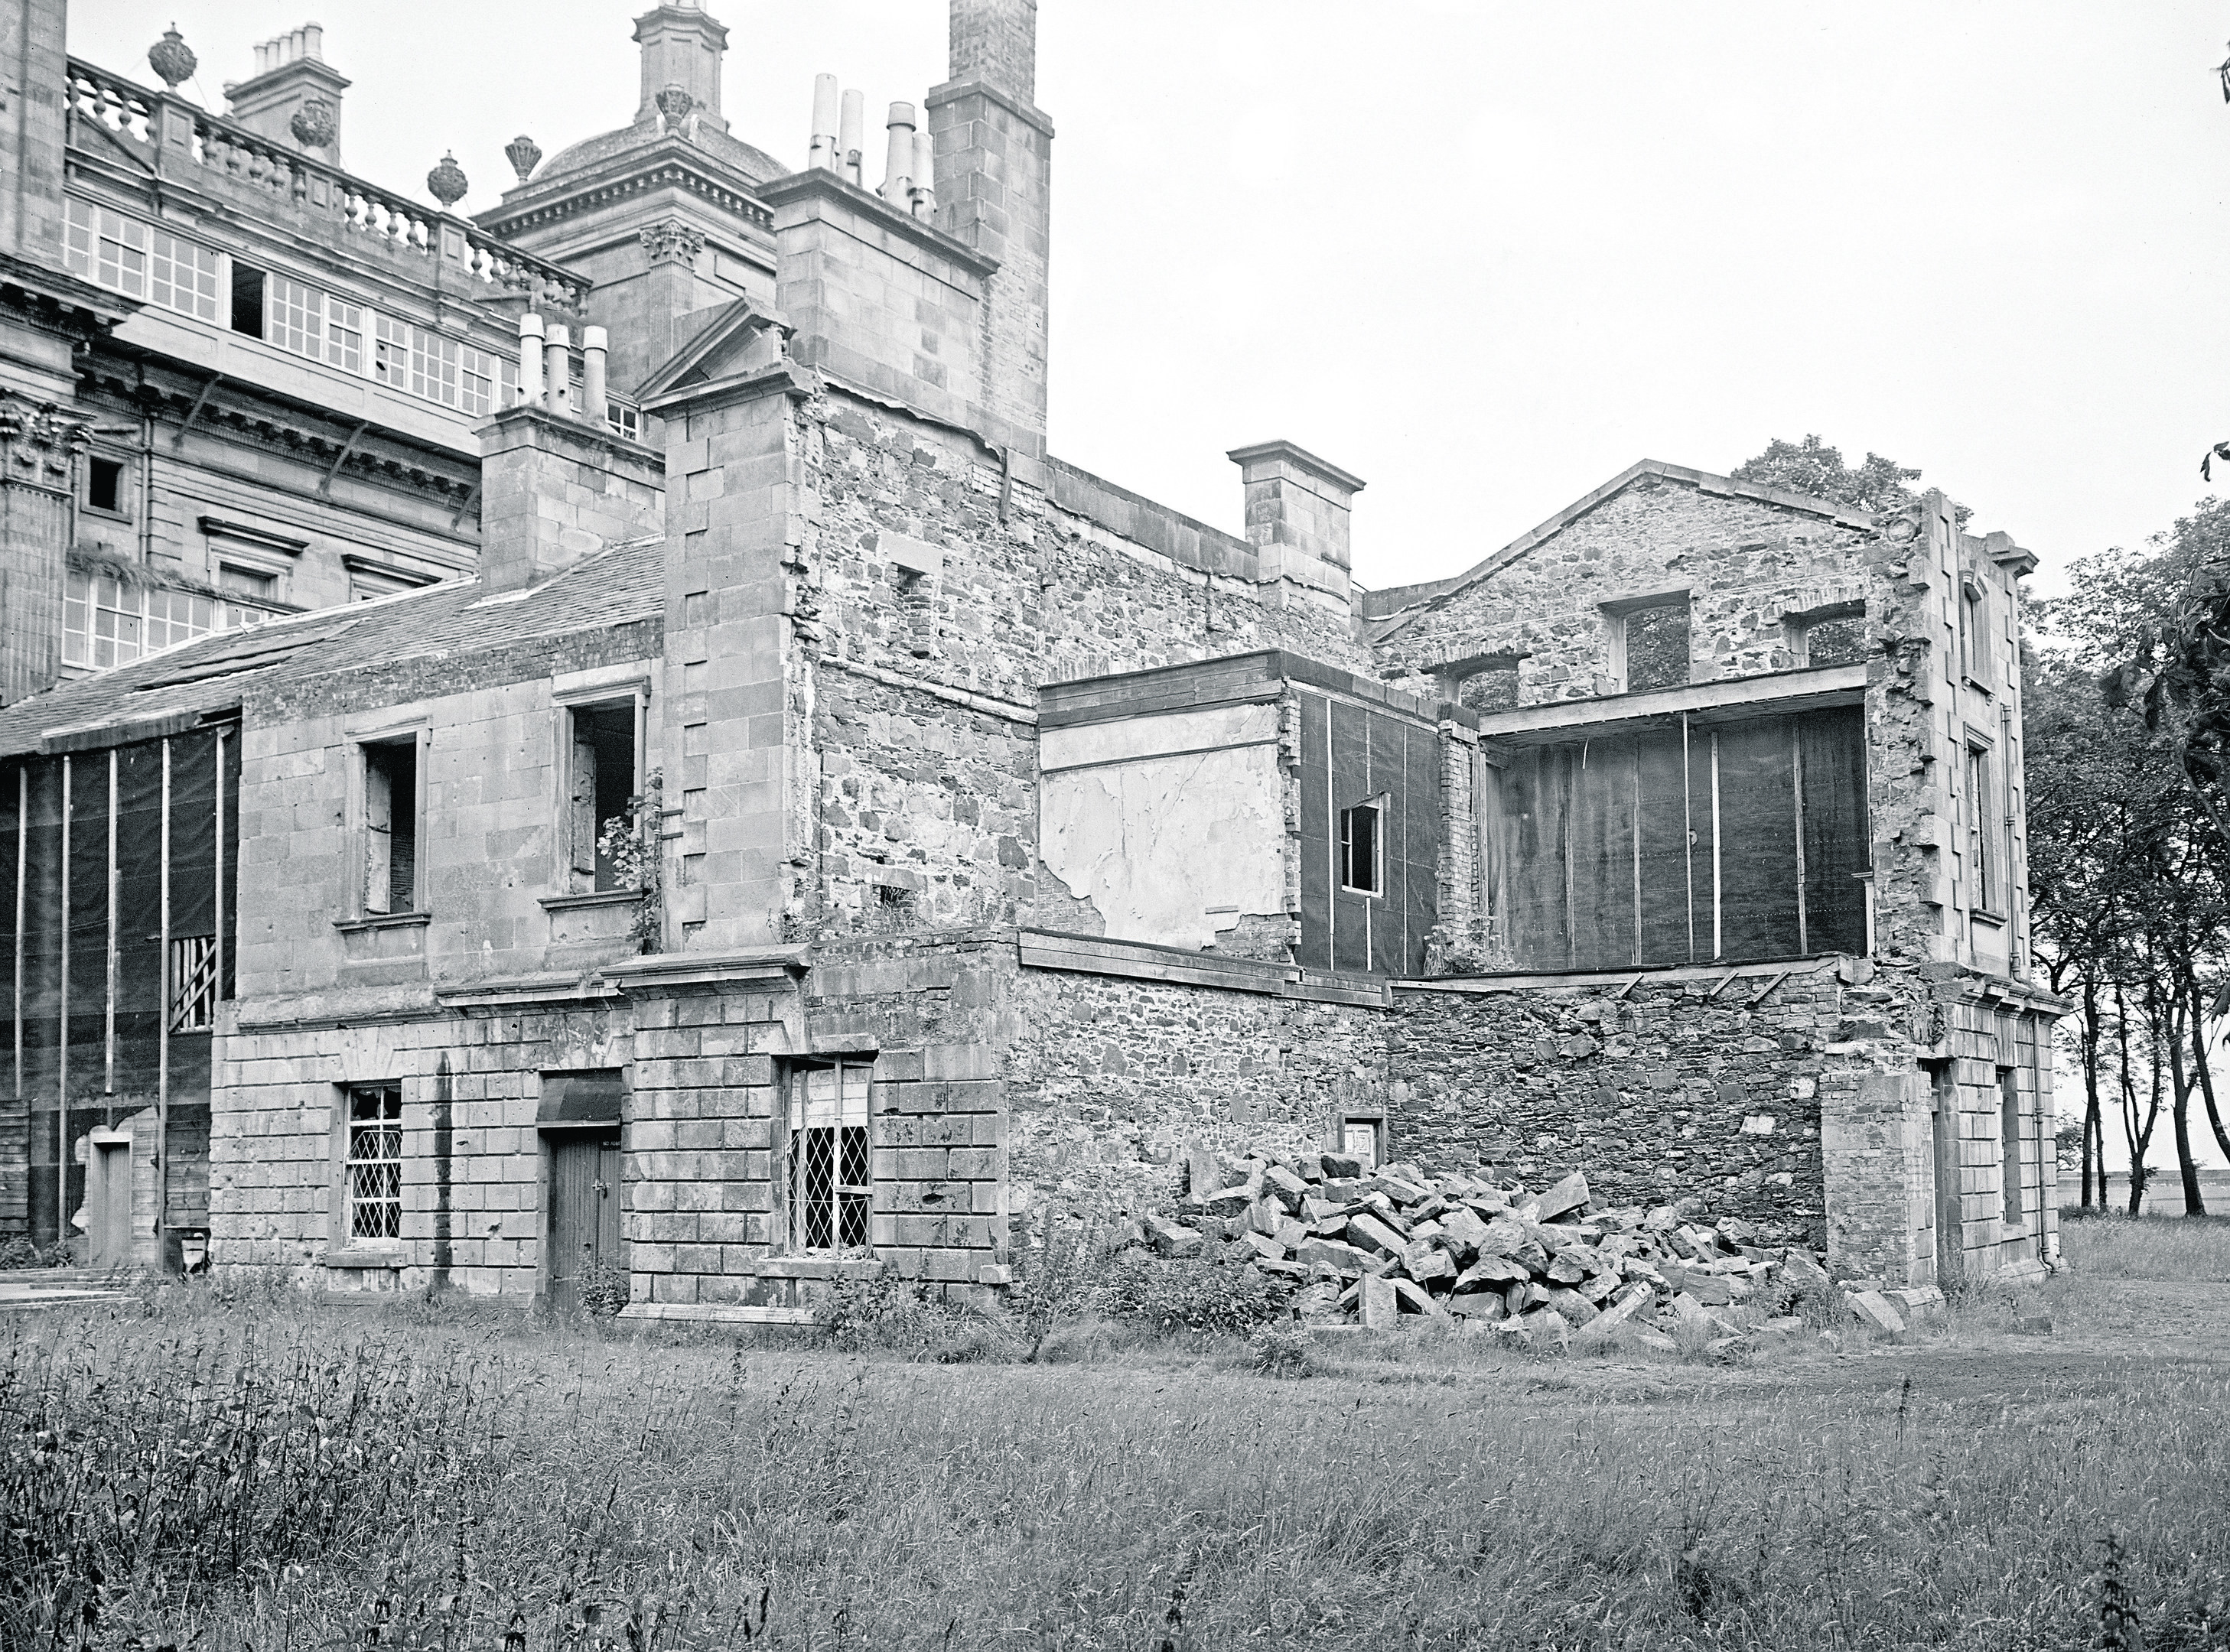 Duff House after being bombed.